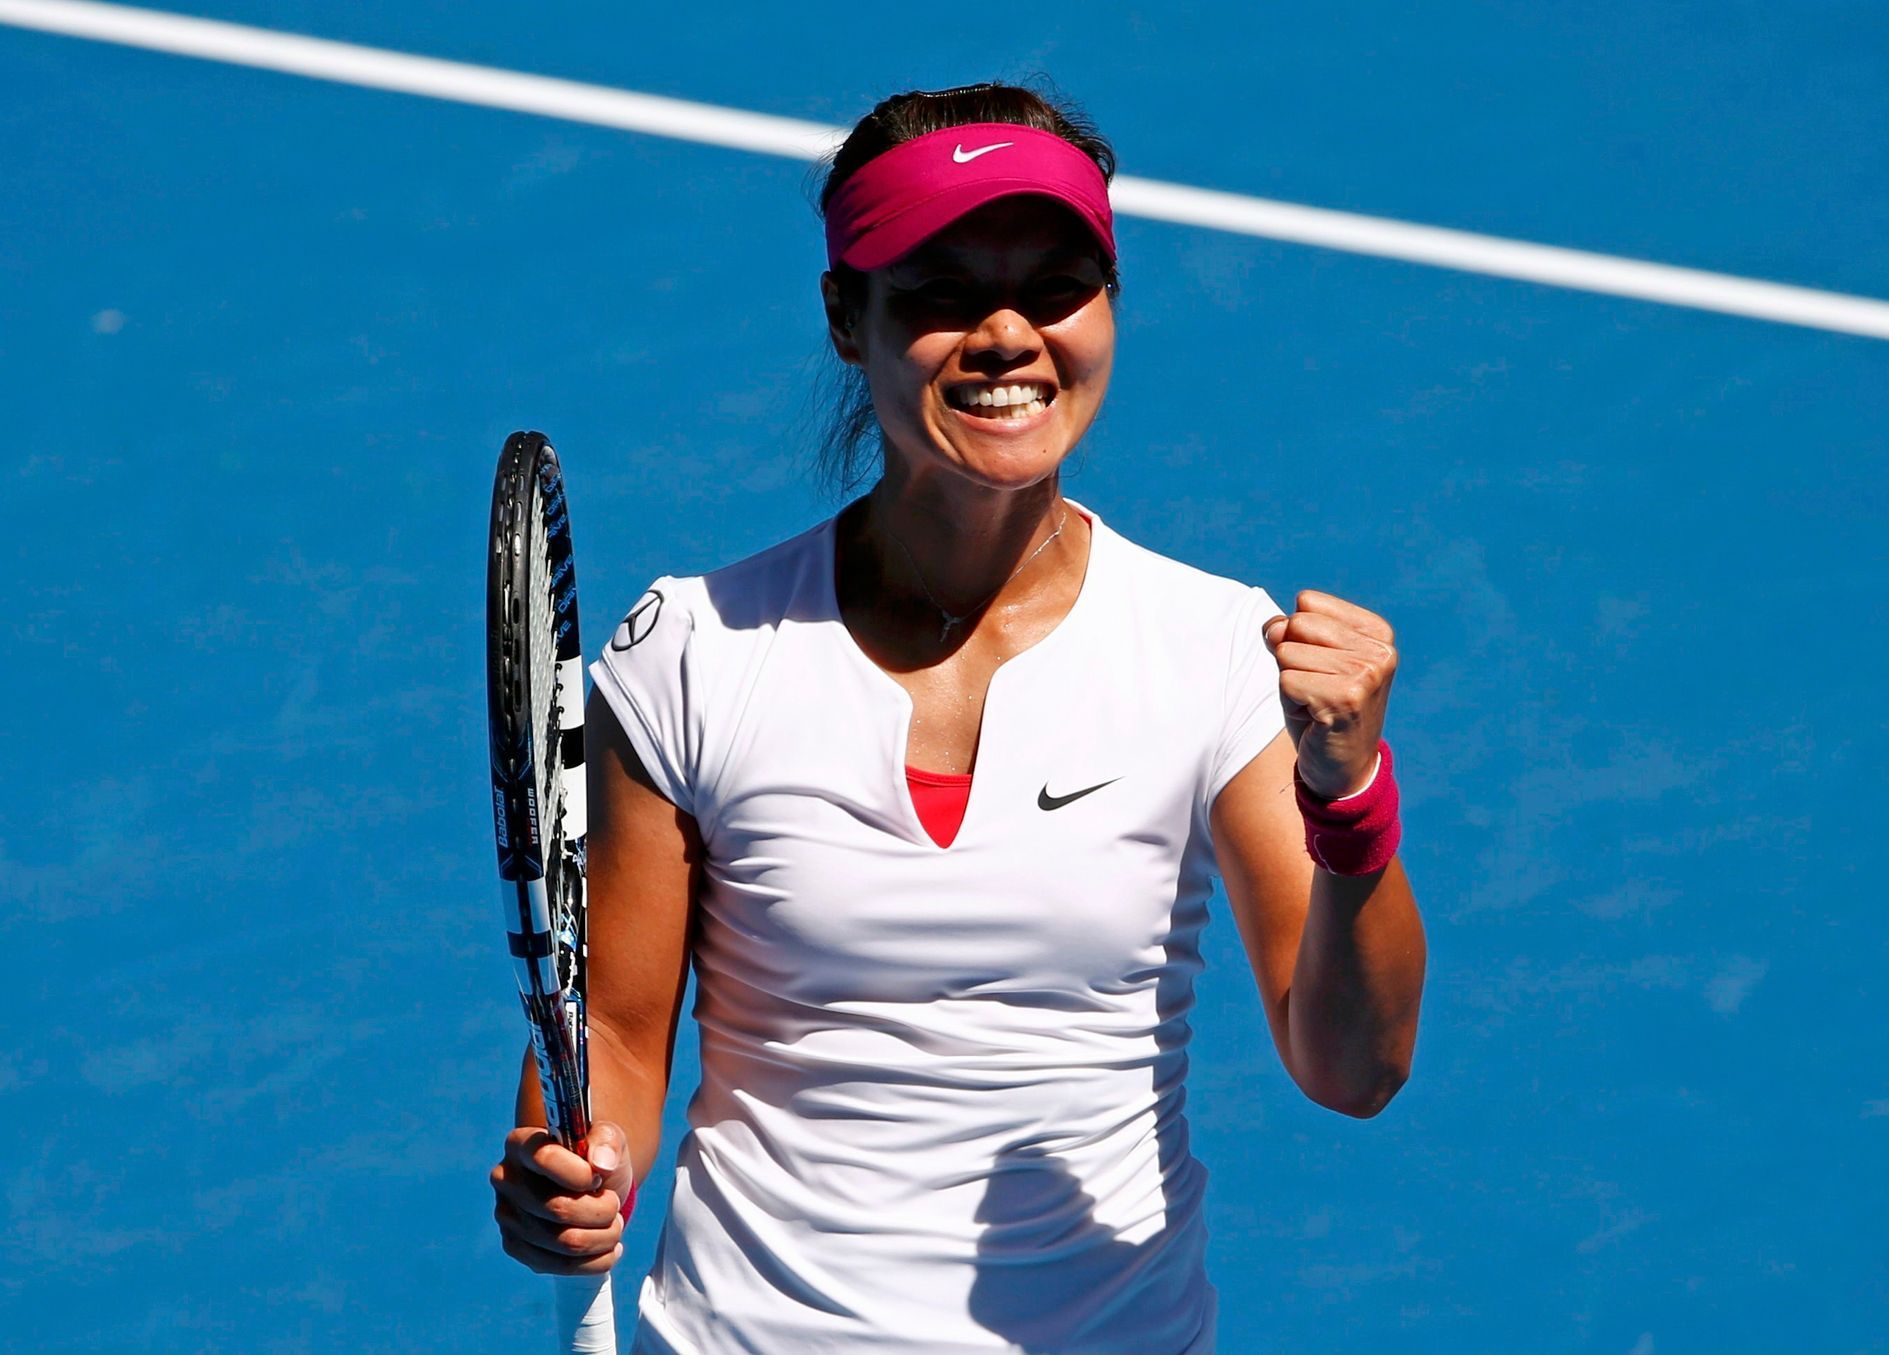 Li Na of China celebrates defeating Lucie Safarova of the Czech Republic during their women's singles match at the Australian Open 2014 tennis tournament in Melbourne